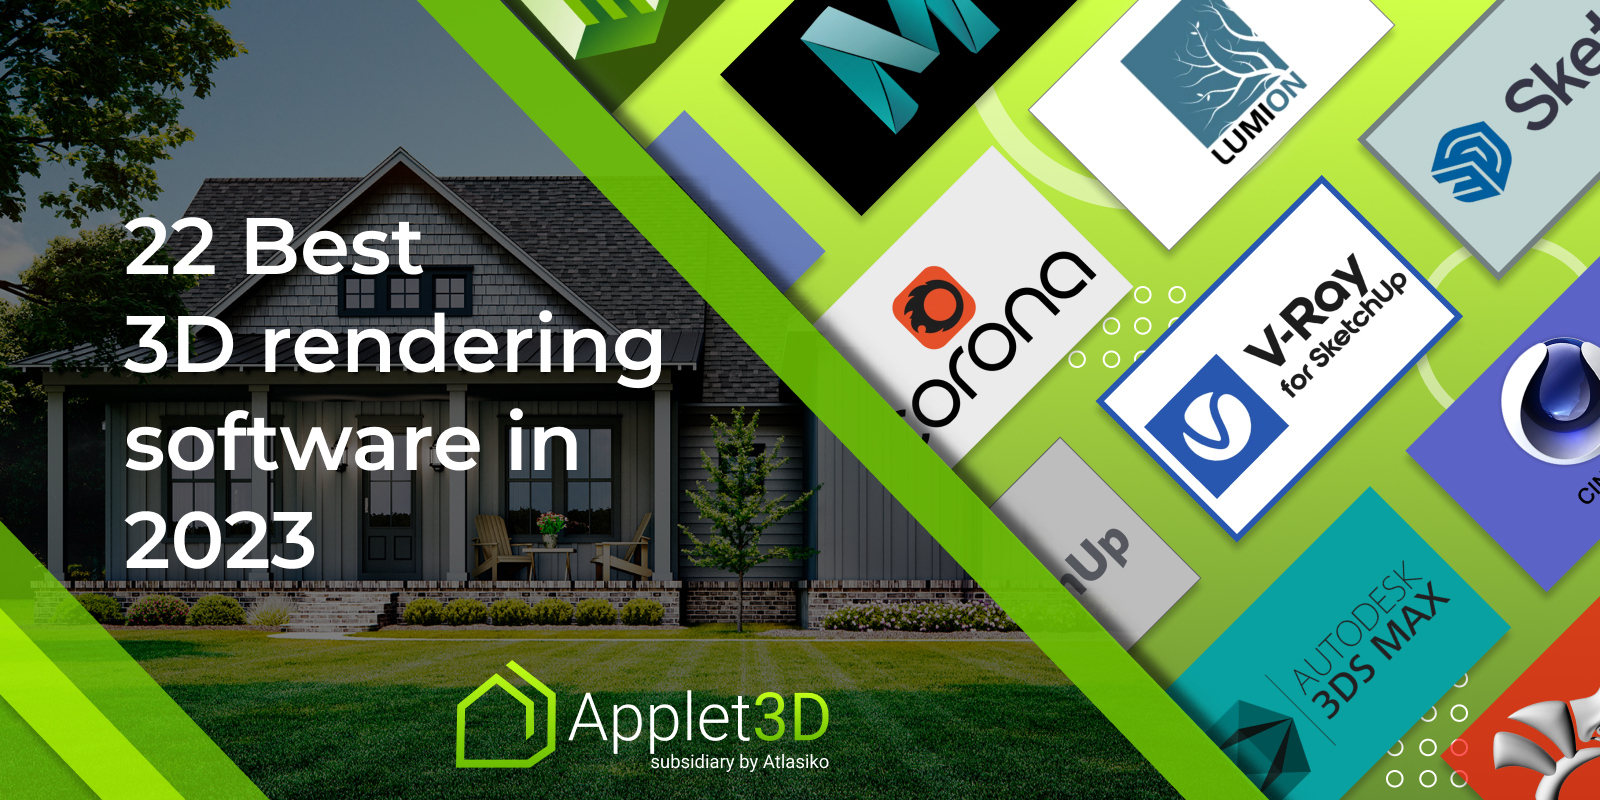 22 Best 3D rendering software in 2023 for Windows and macOS - Applet3D